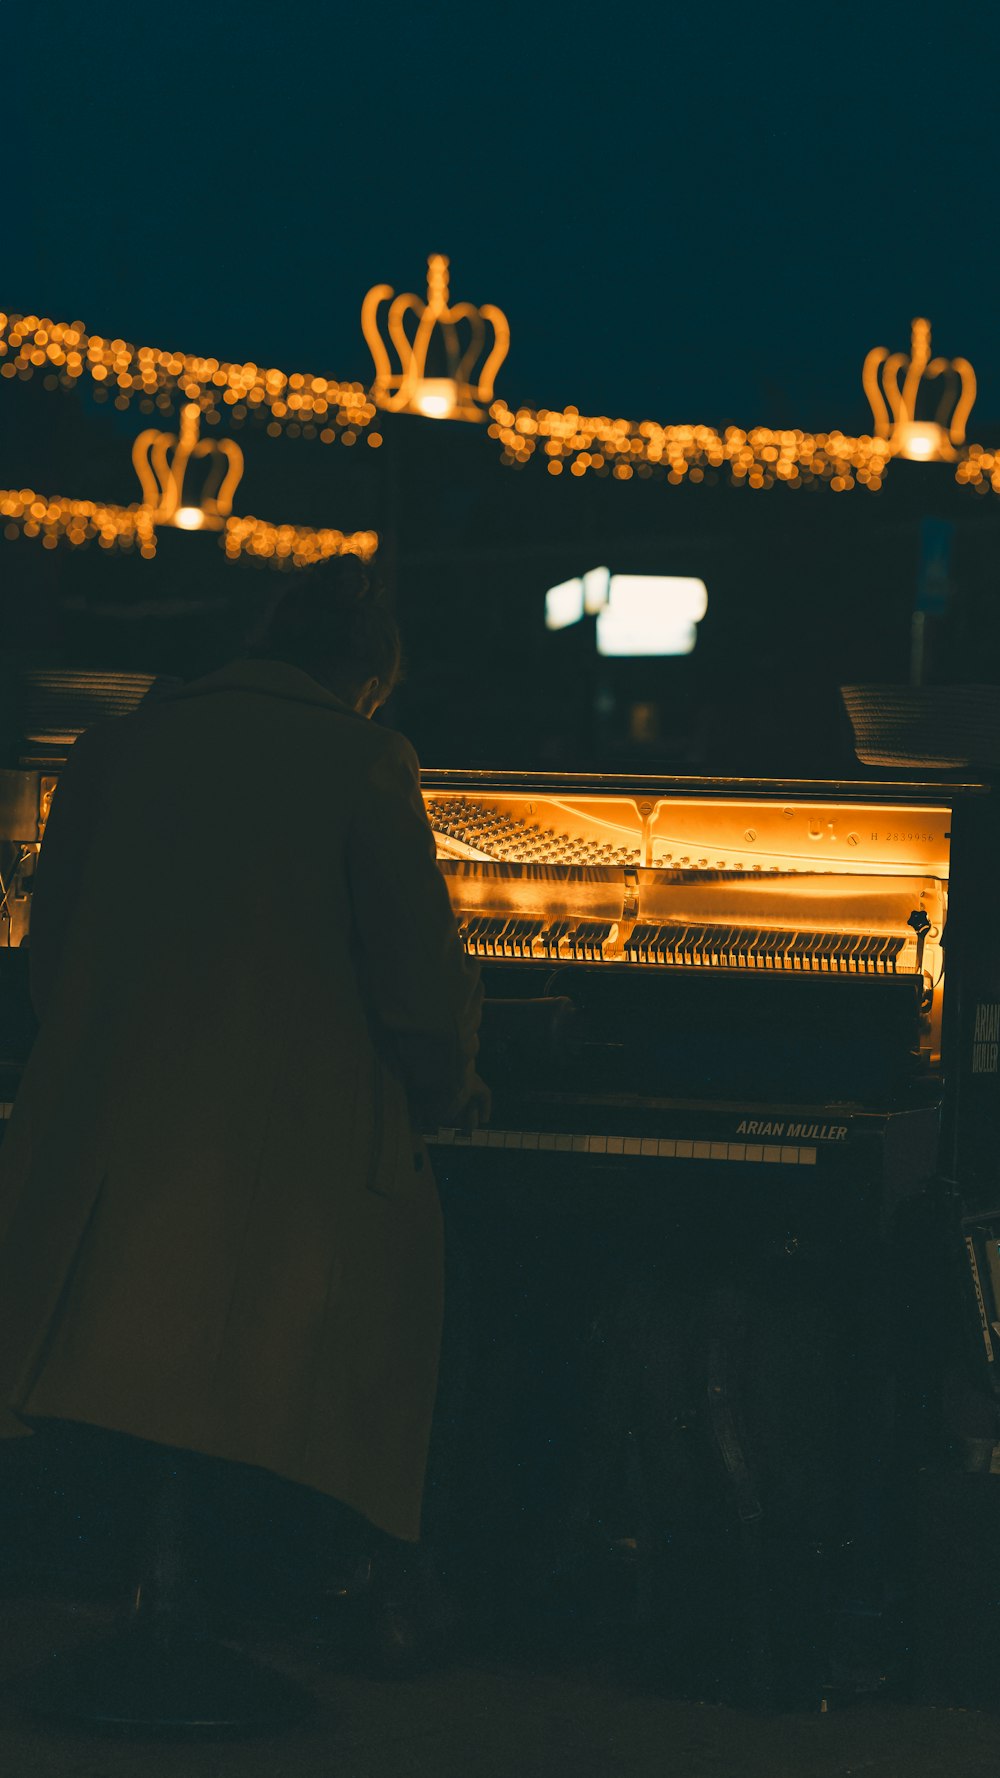 a person sitting at a piano in front of some lights